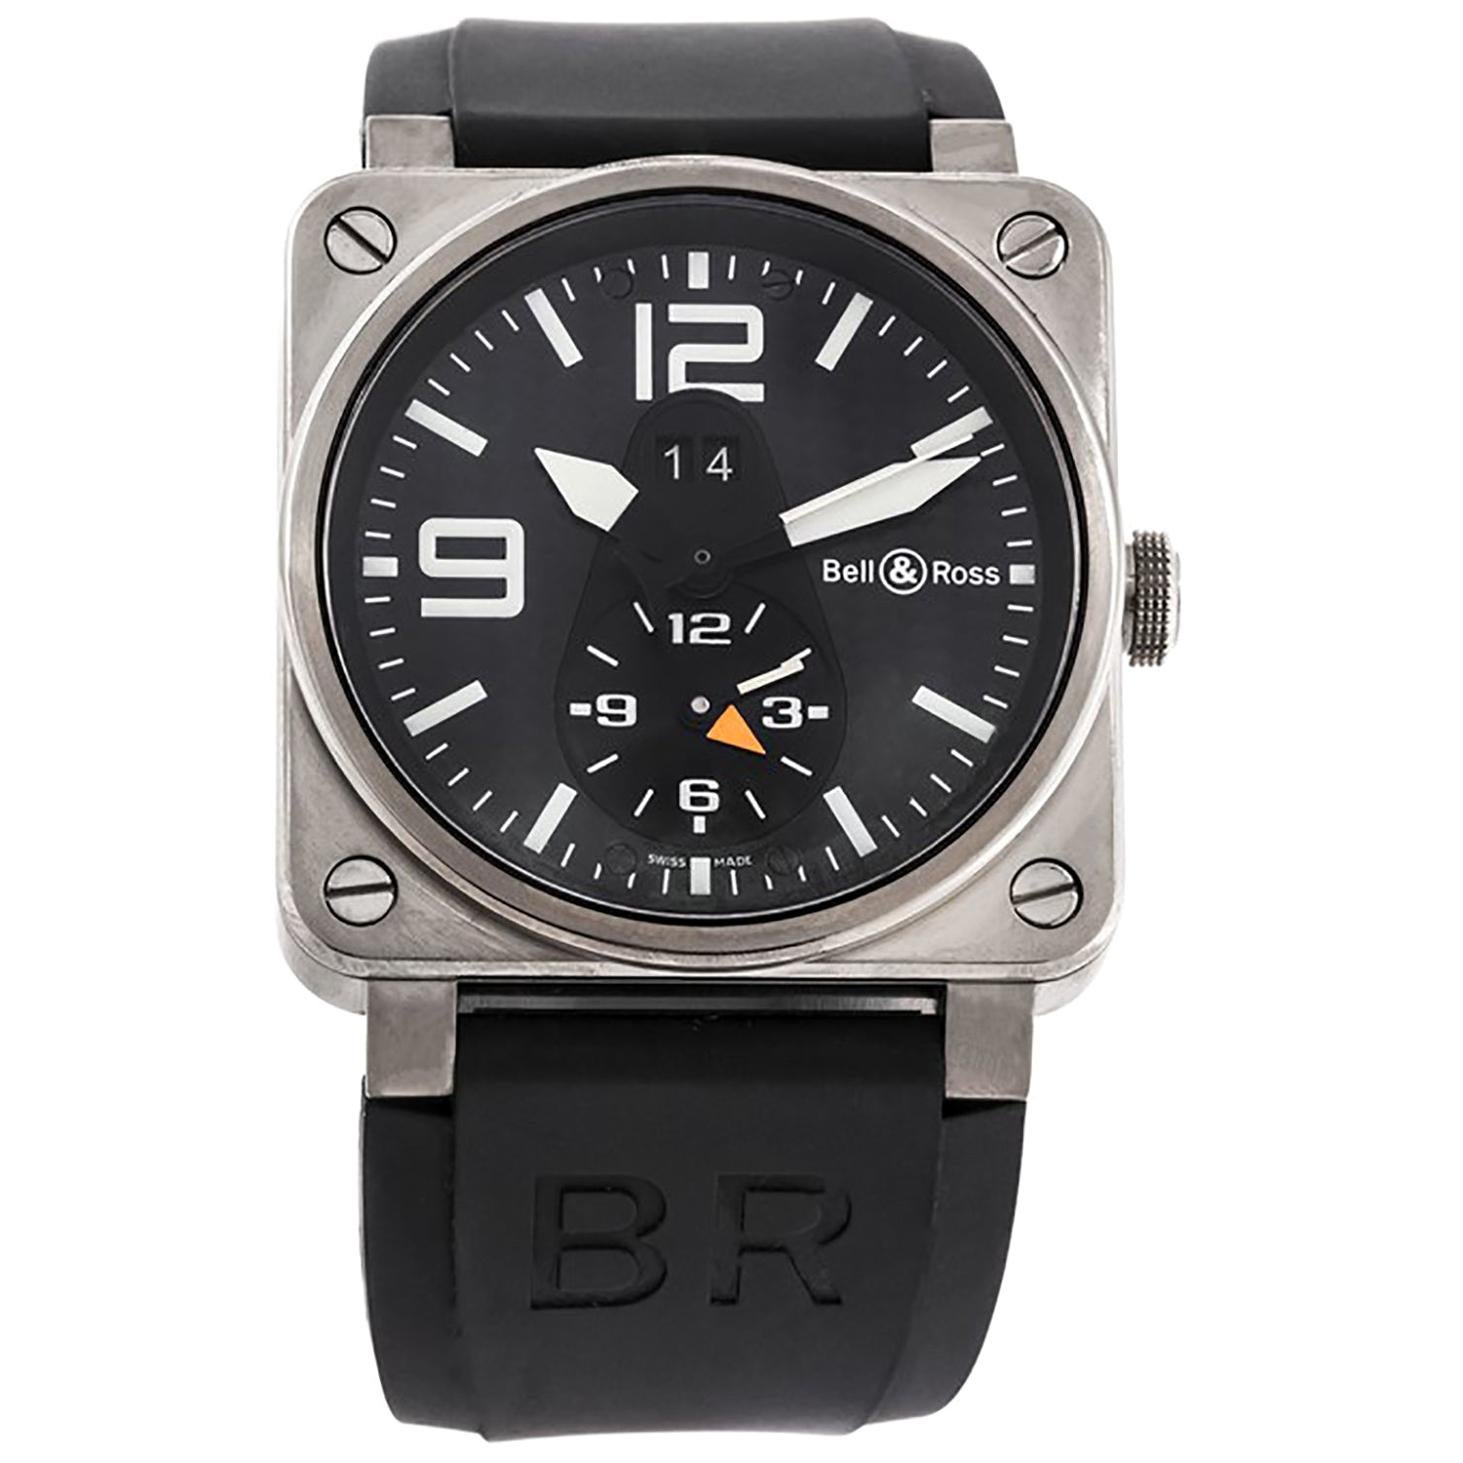 Bell & Ross BR03-51 GMT Titanium and Stainless Steel Watch